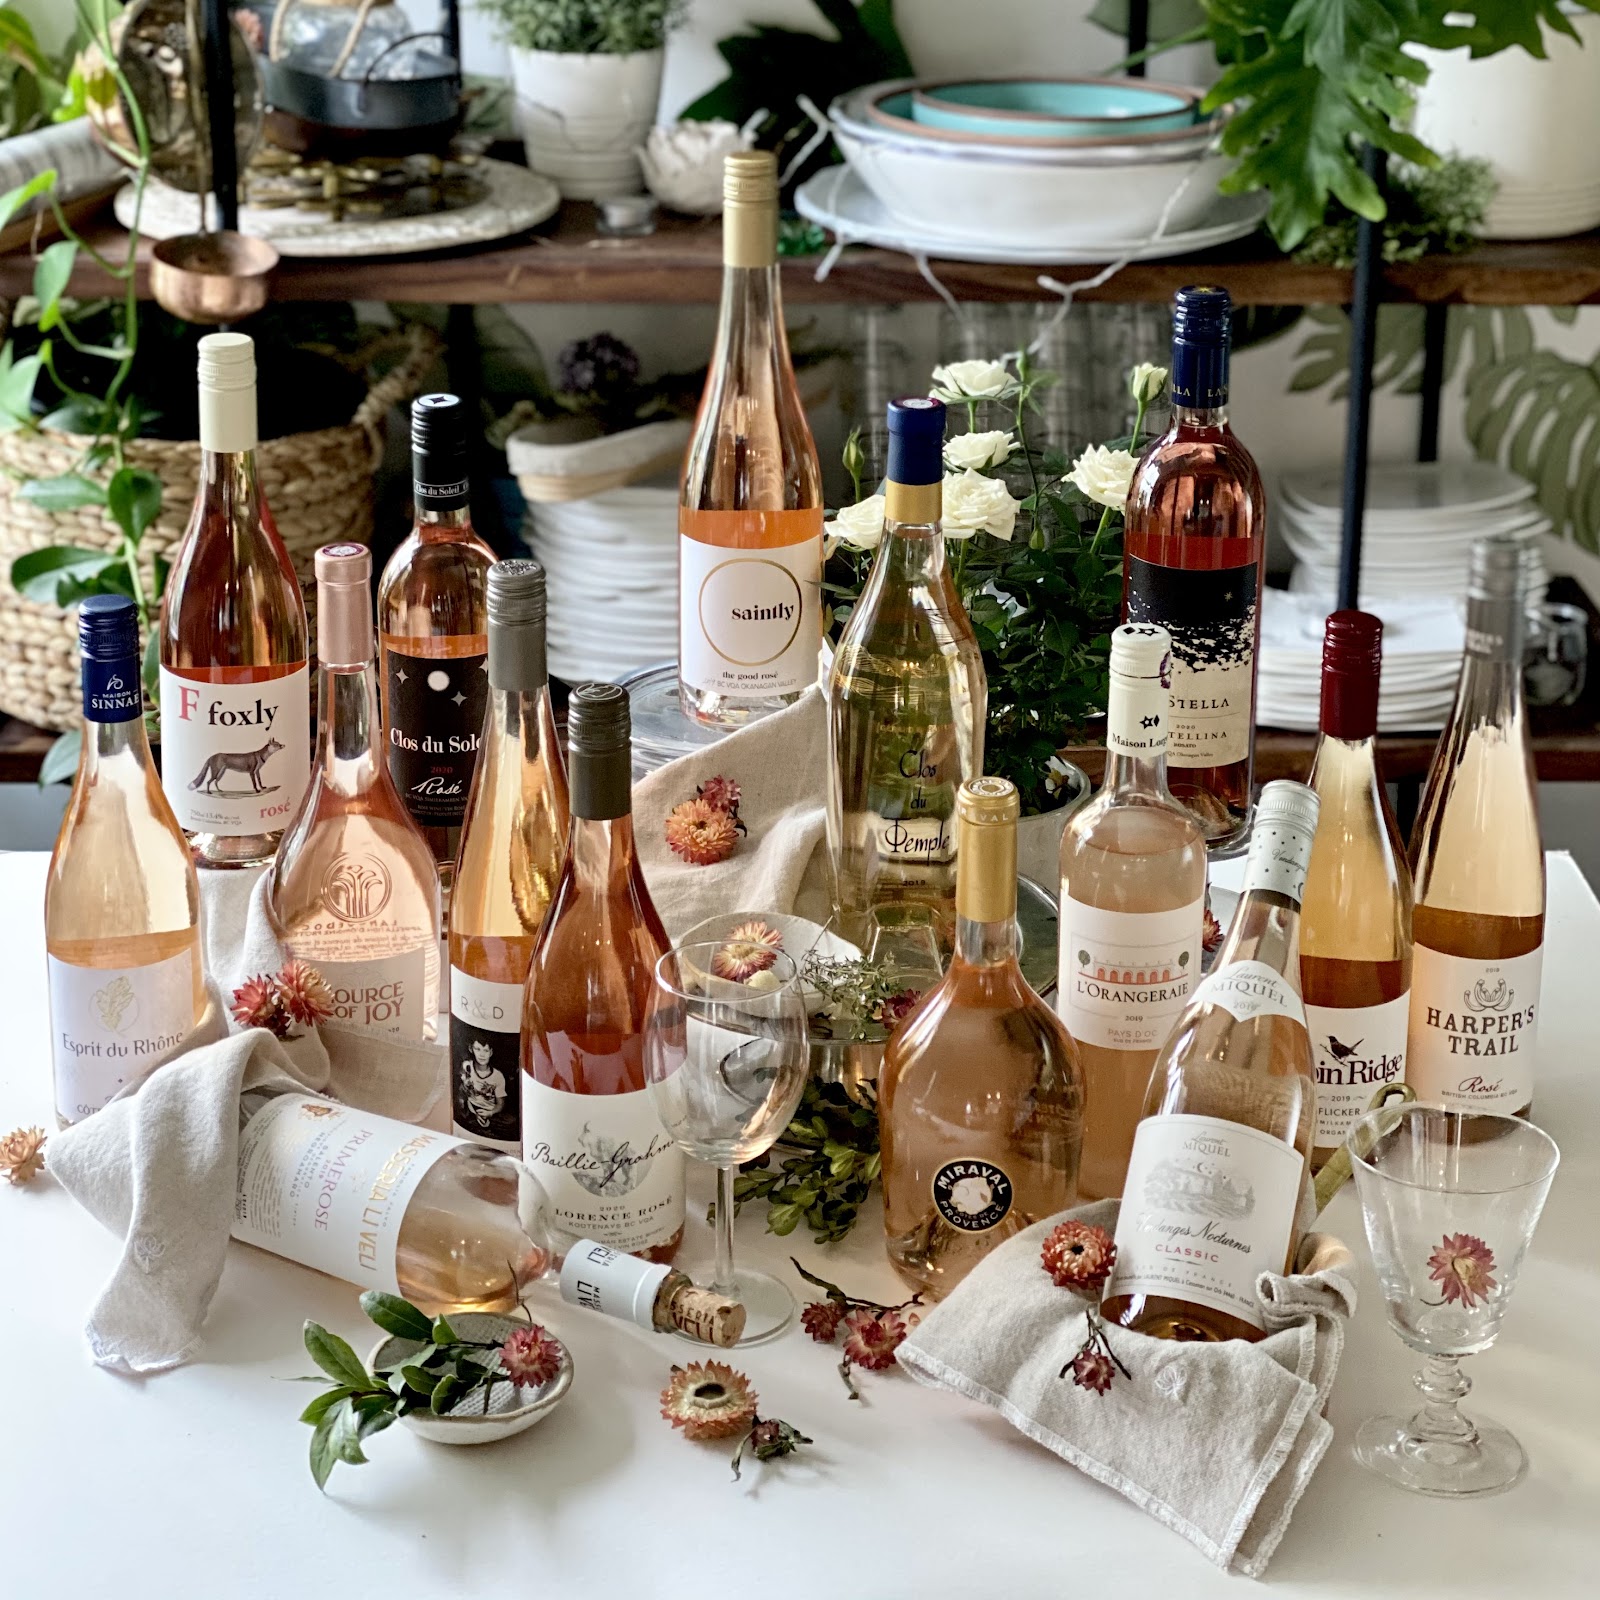 the home kitchen alison kent good wine gal barb wild 5 week series full wine photo shot tasting rose wines rose all may